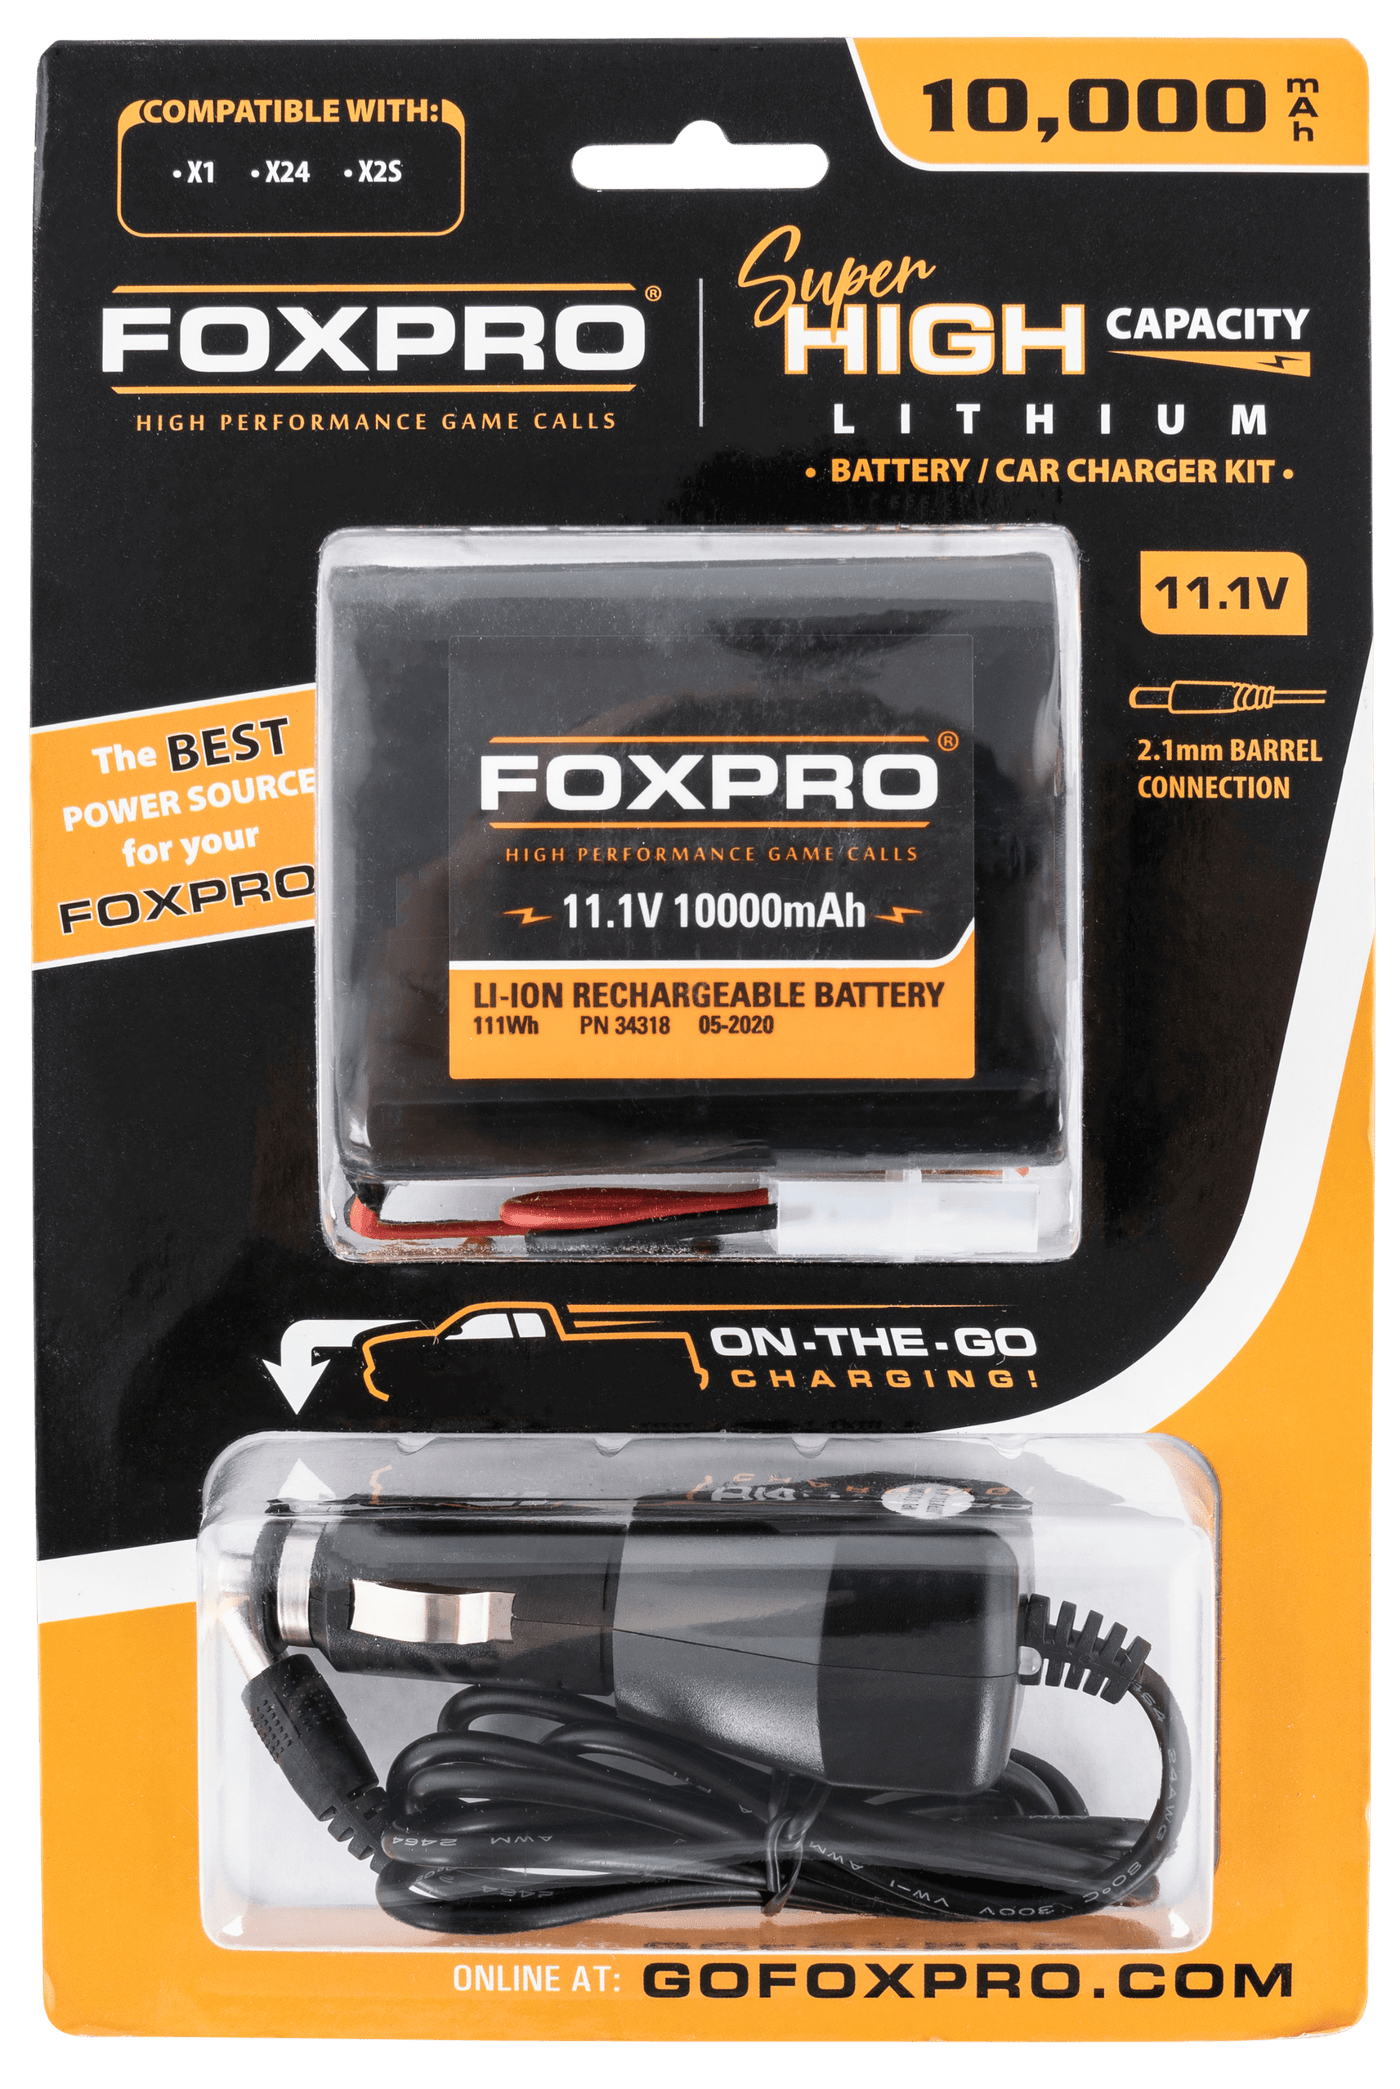 Foxpro Foxpro Super High Capacity Battery & Car Charger, Foxpro  Supbattchg     Super High Cap Bttery/charg Accessories